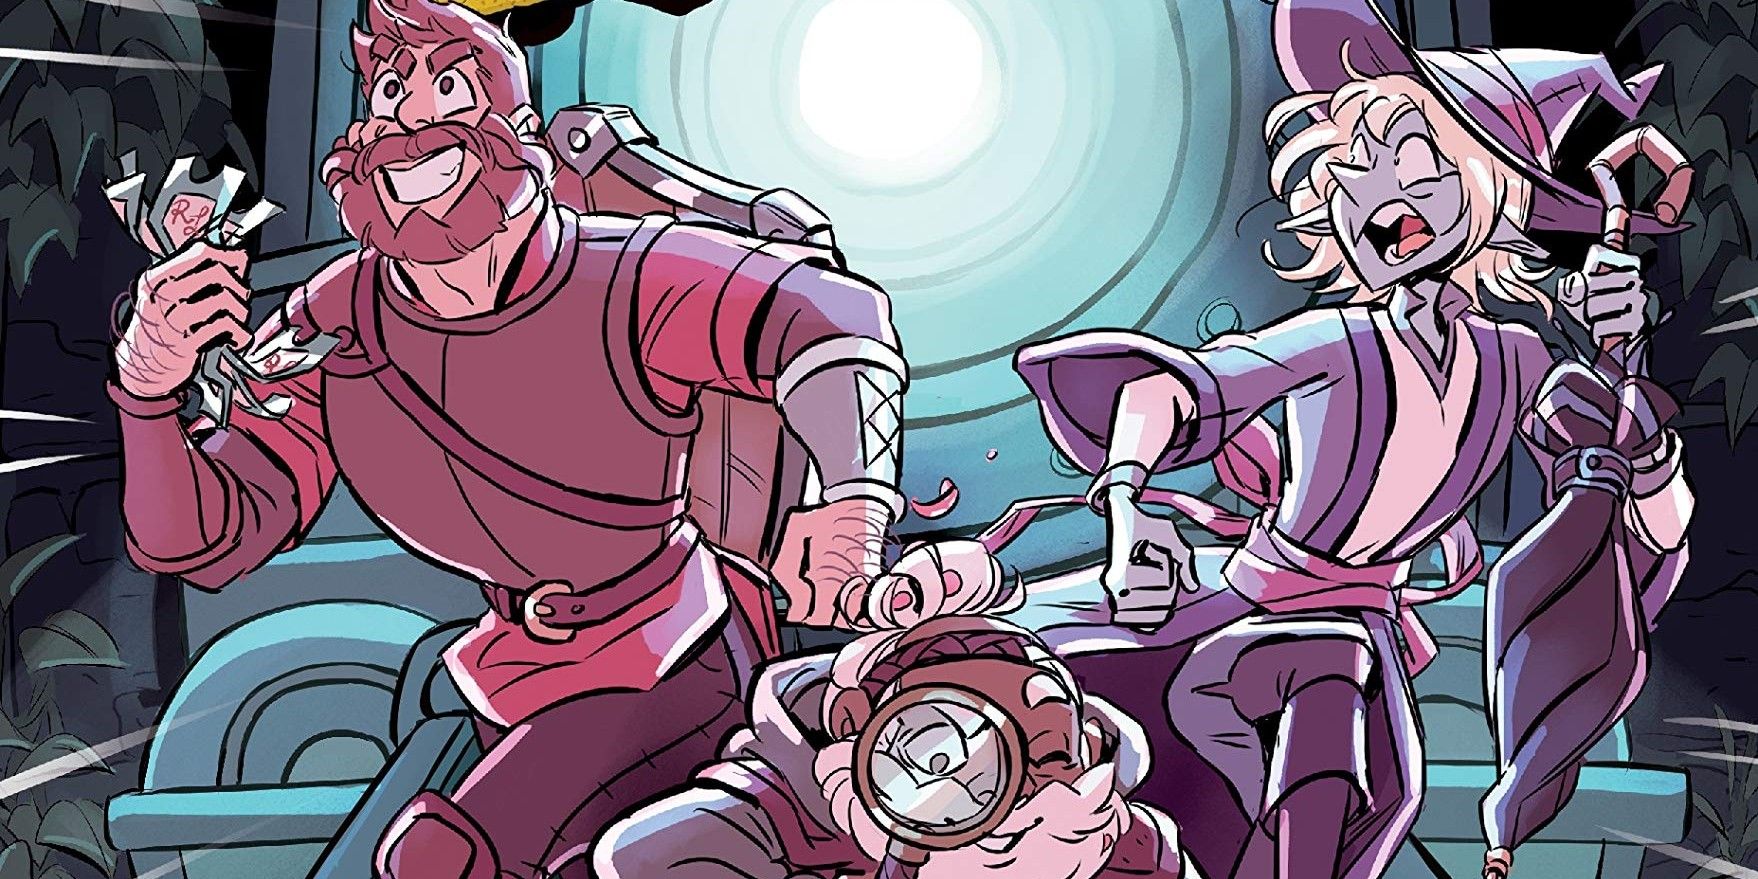 The Adventure Zone Murder on the Rockport Limited graphic novel cover